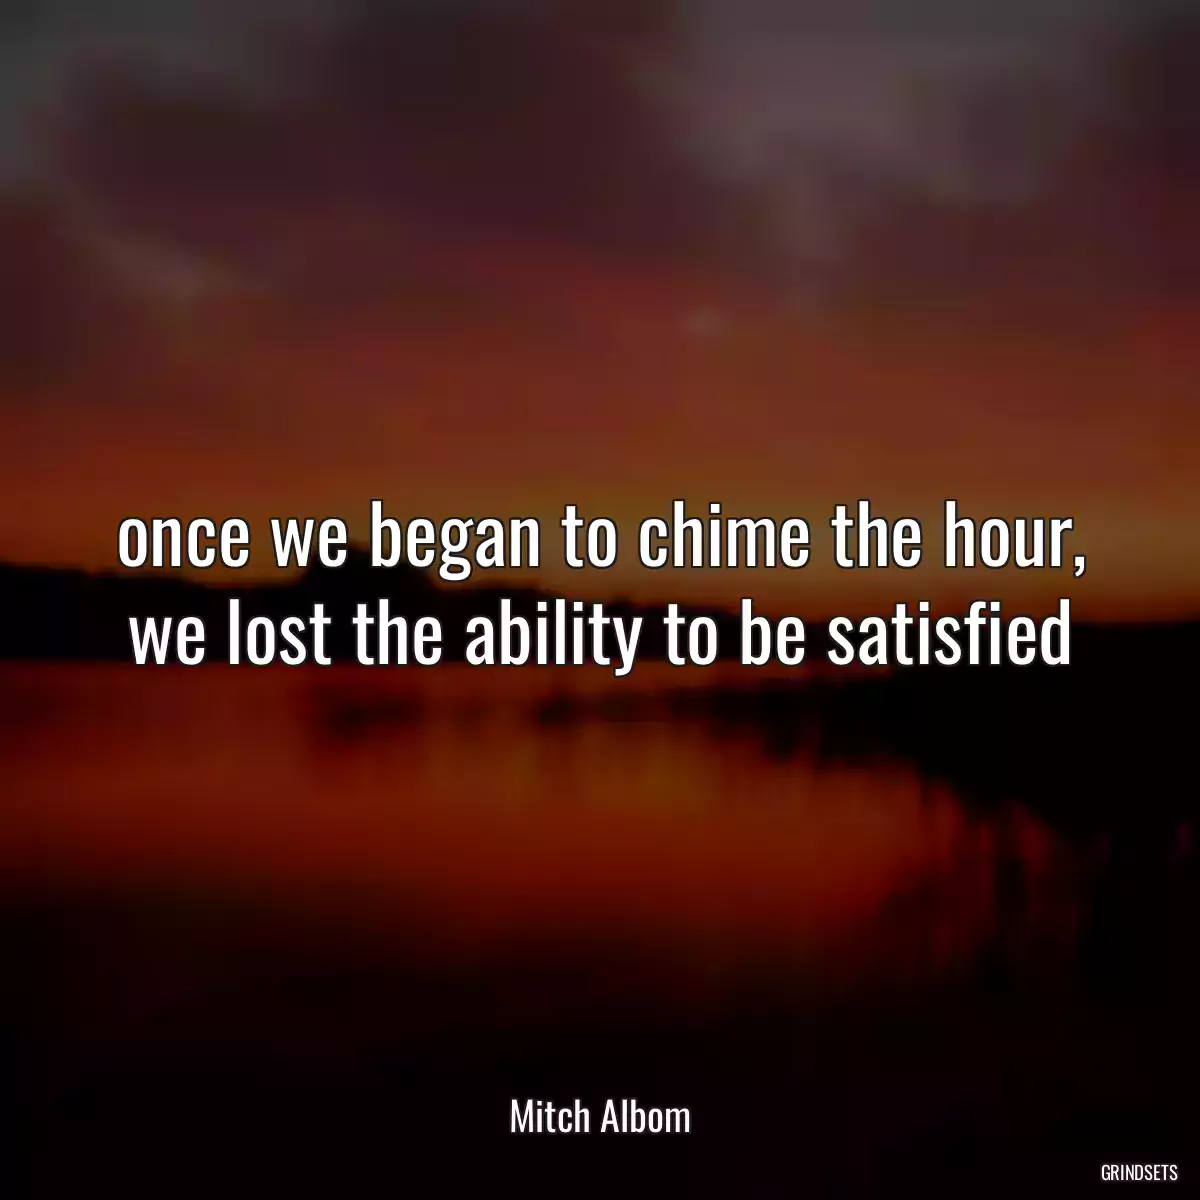 once we began to chime the hour, we lost the ability to be satisfied